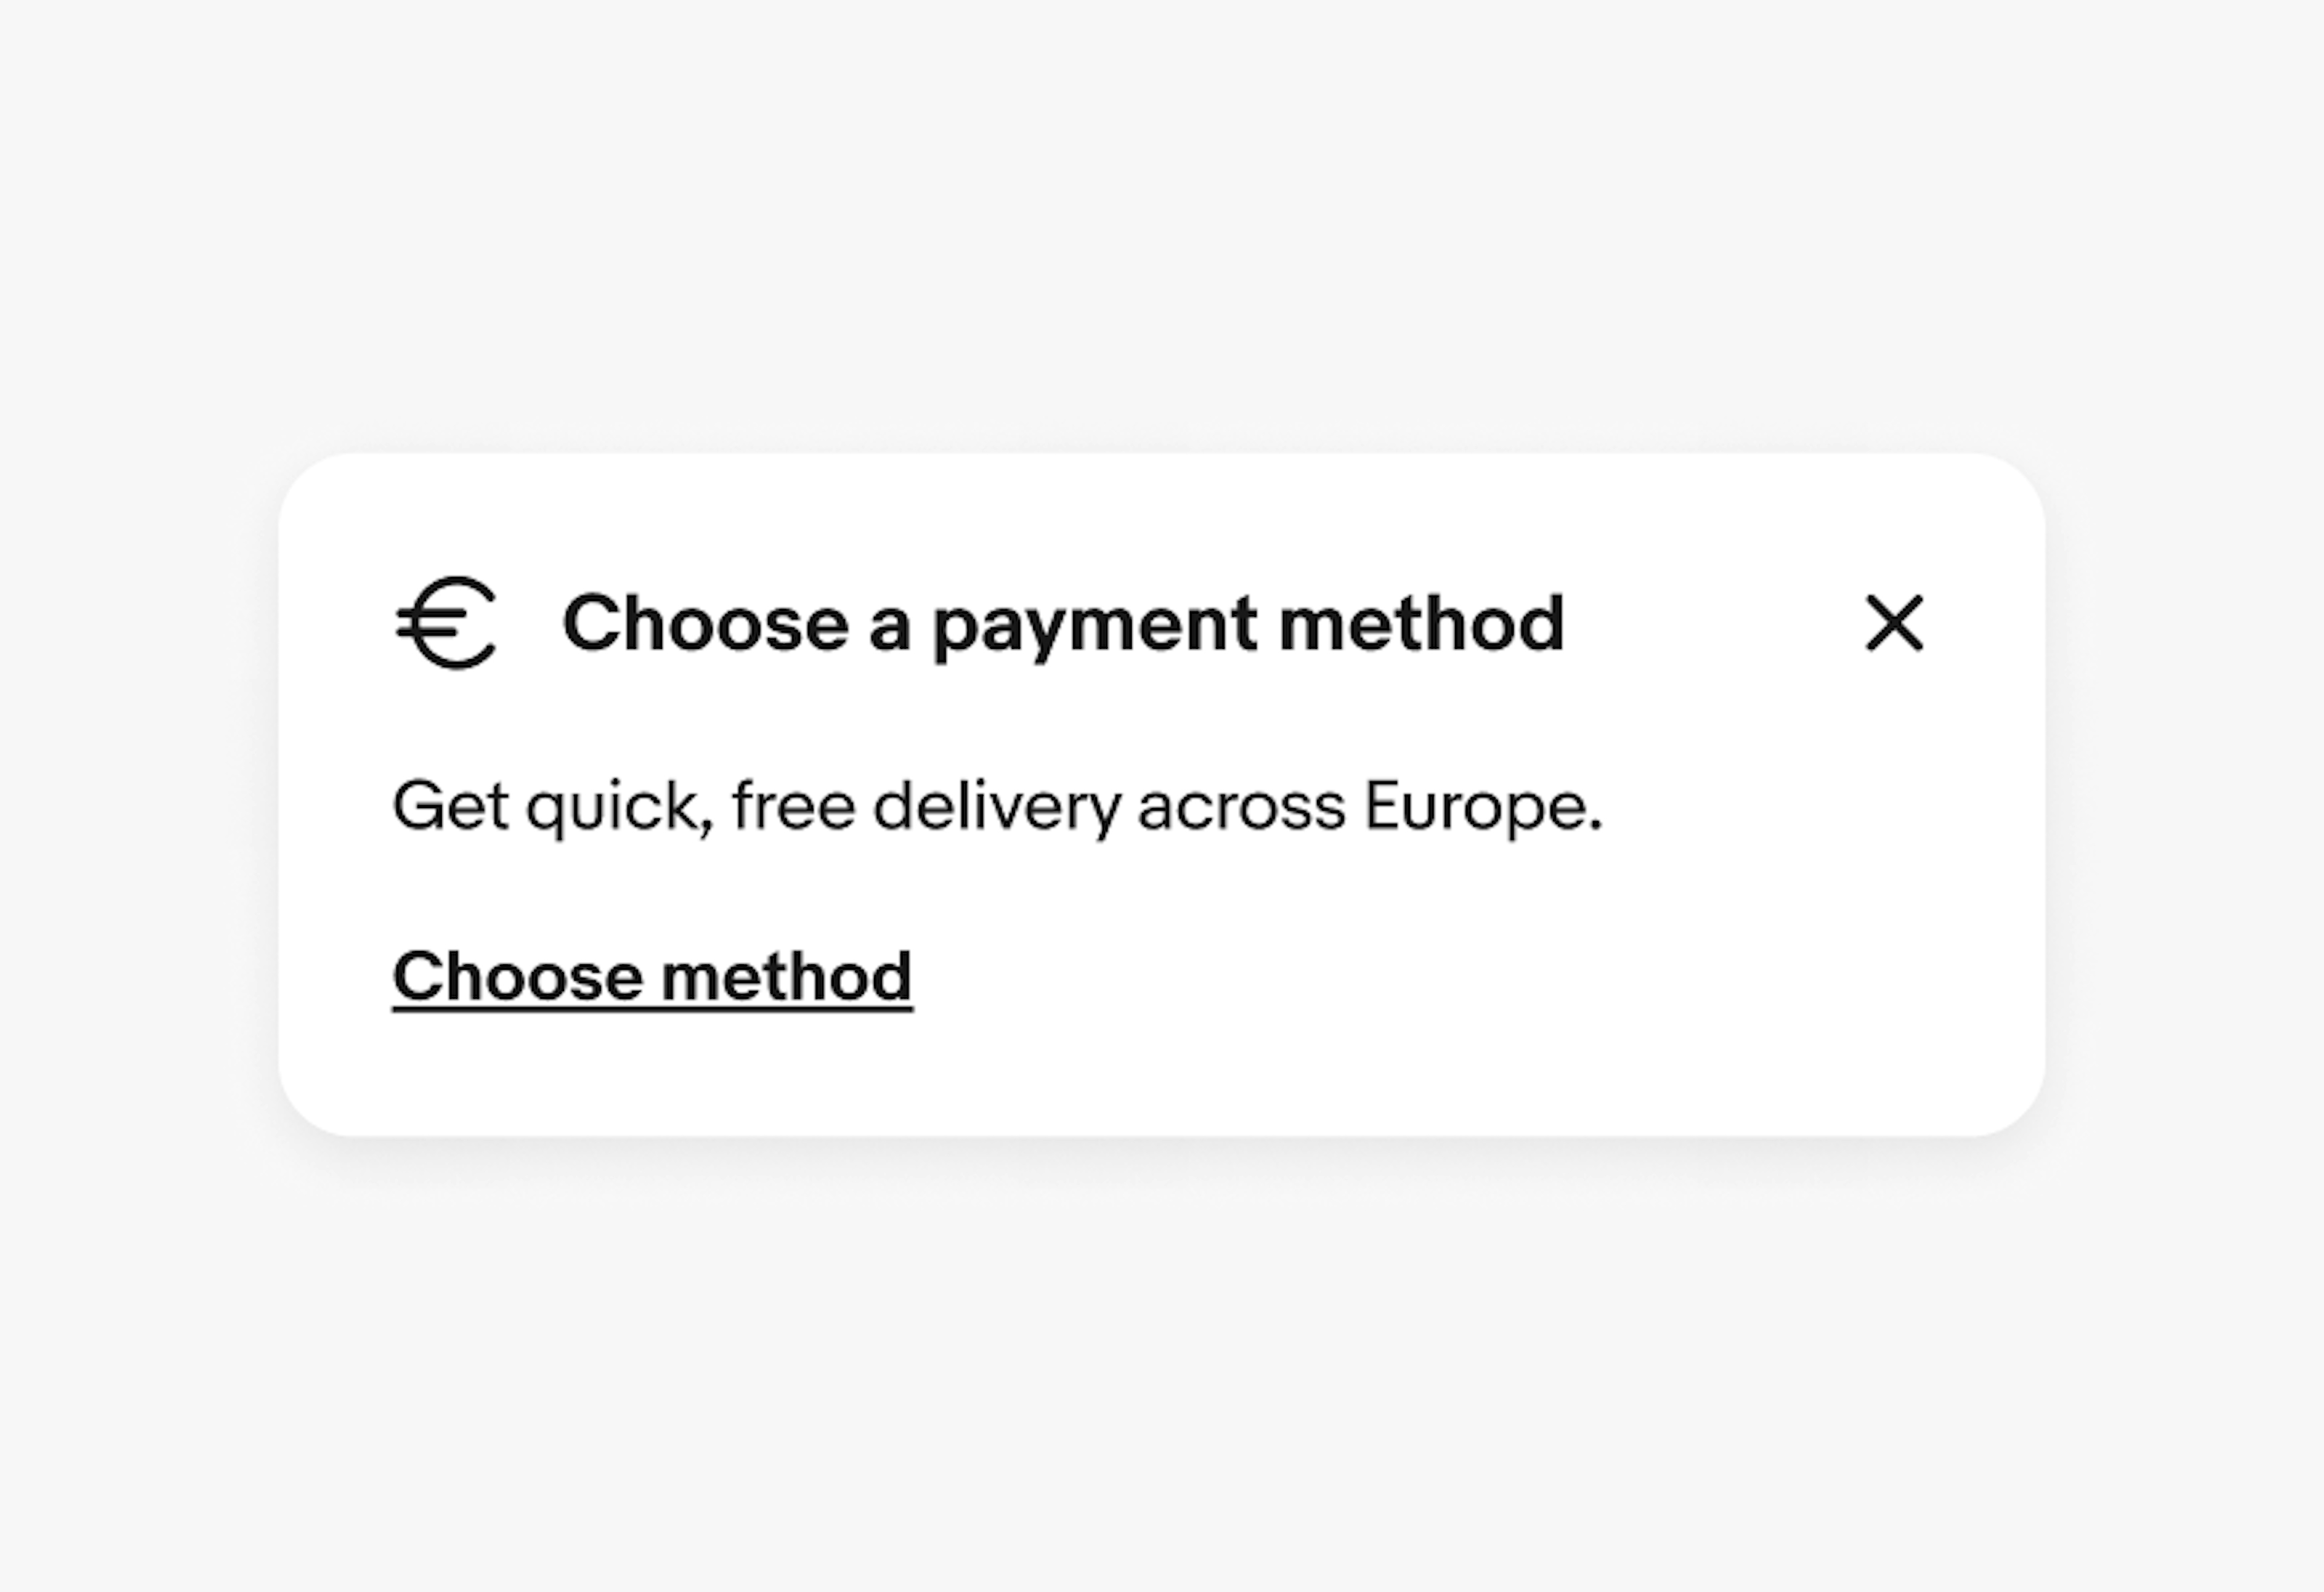 An education notice asking to choose a payment method. A euro currency icon is in the upper left with the description “Get quick, free delivery across Europe” beneath.